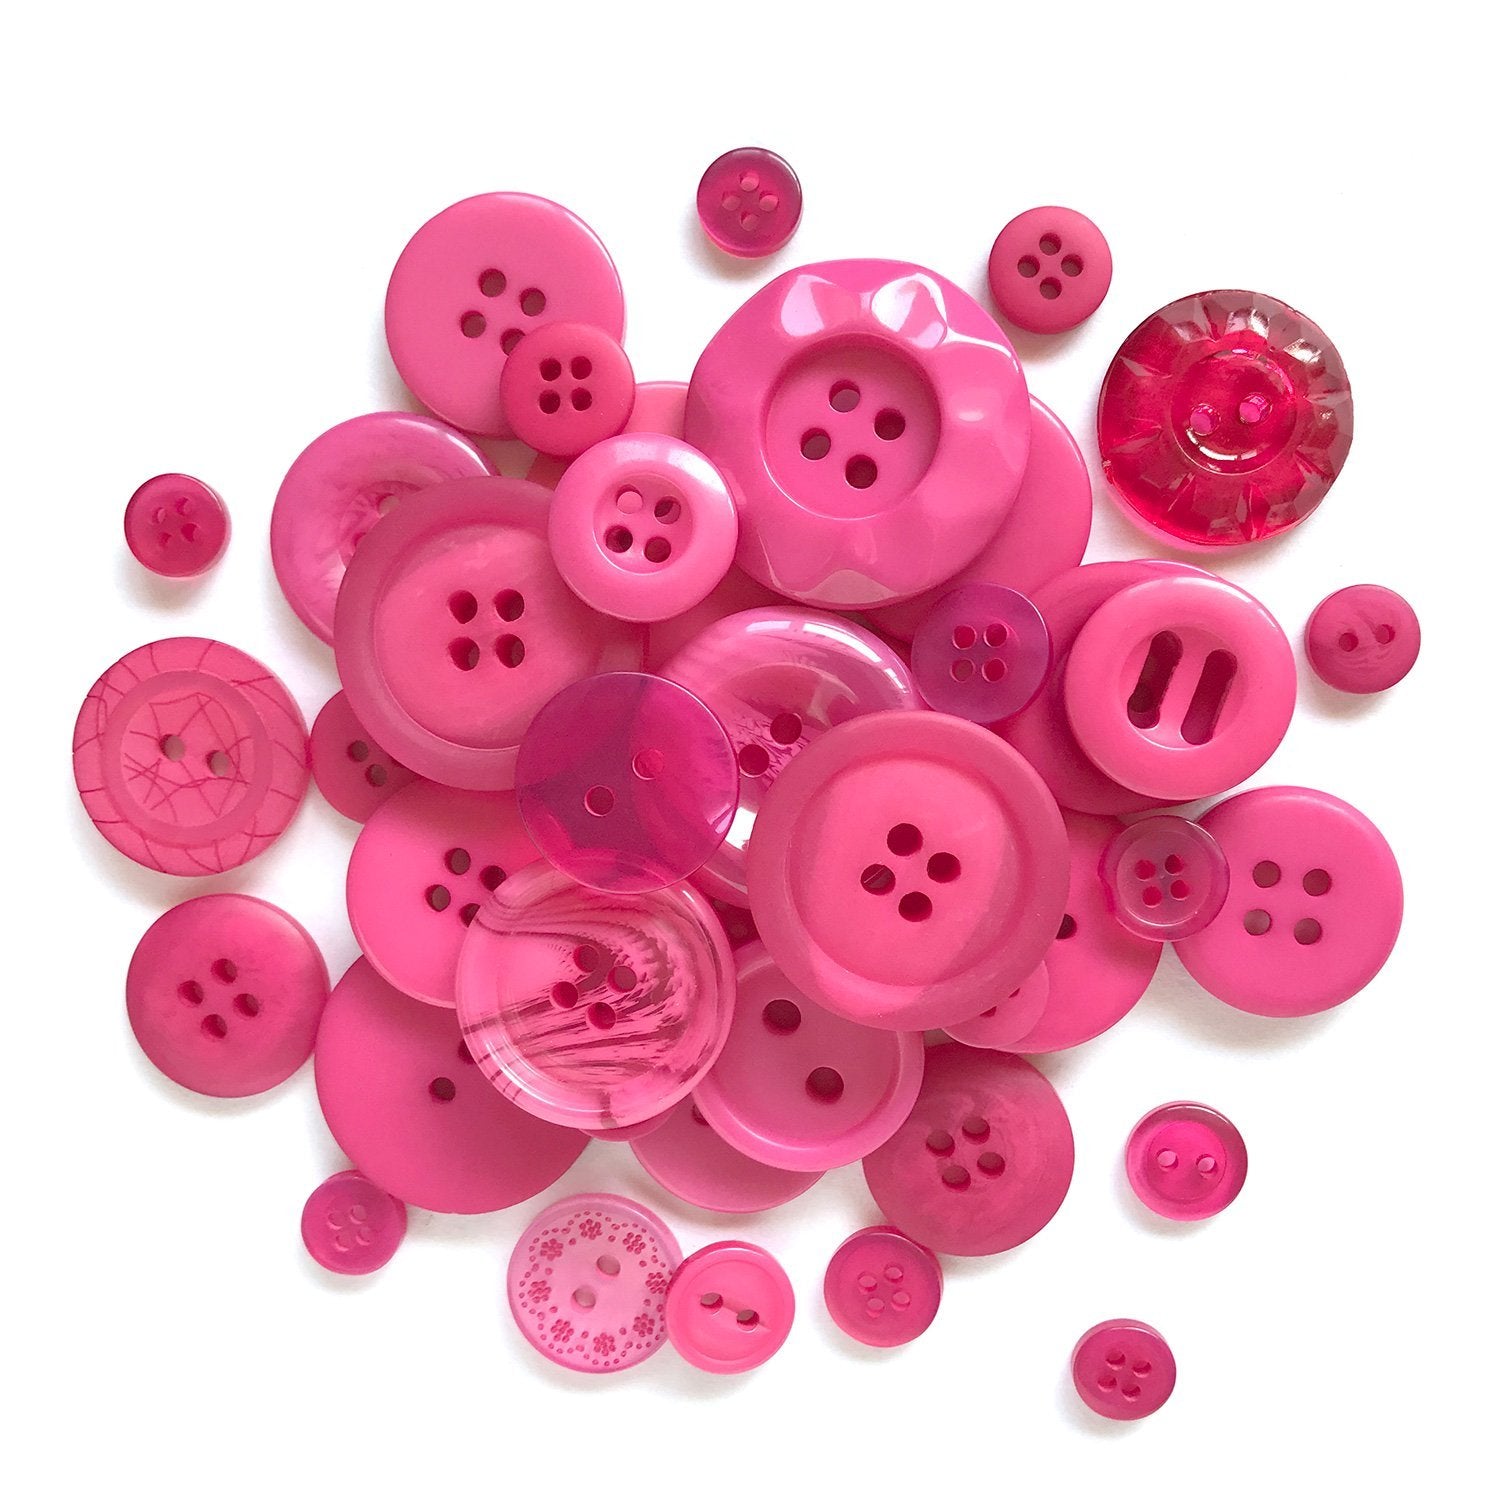 Hot pink Buttons for Crafts Sewing Scrapbooks and Quilts. Assorted sizes  including small hot pink buttons